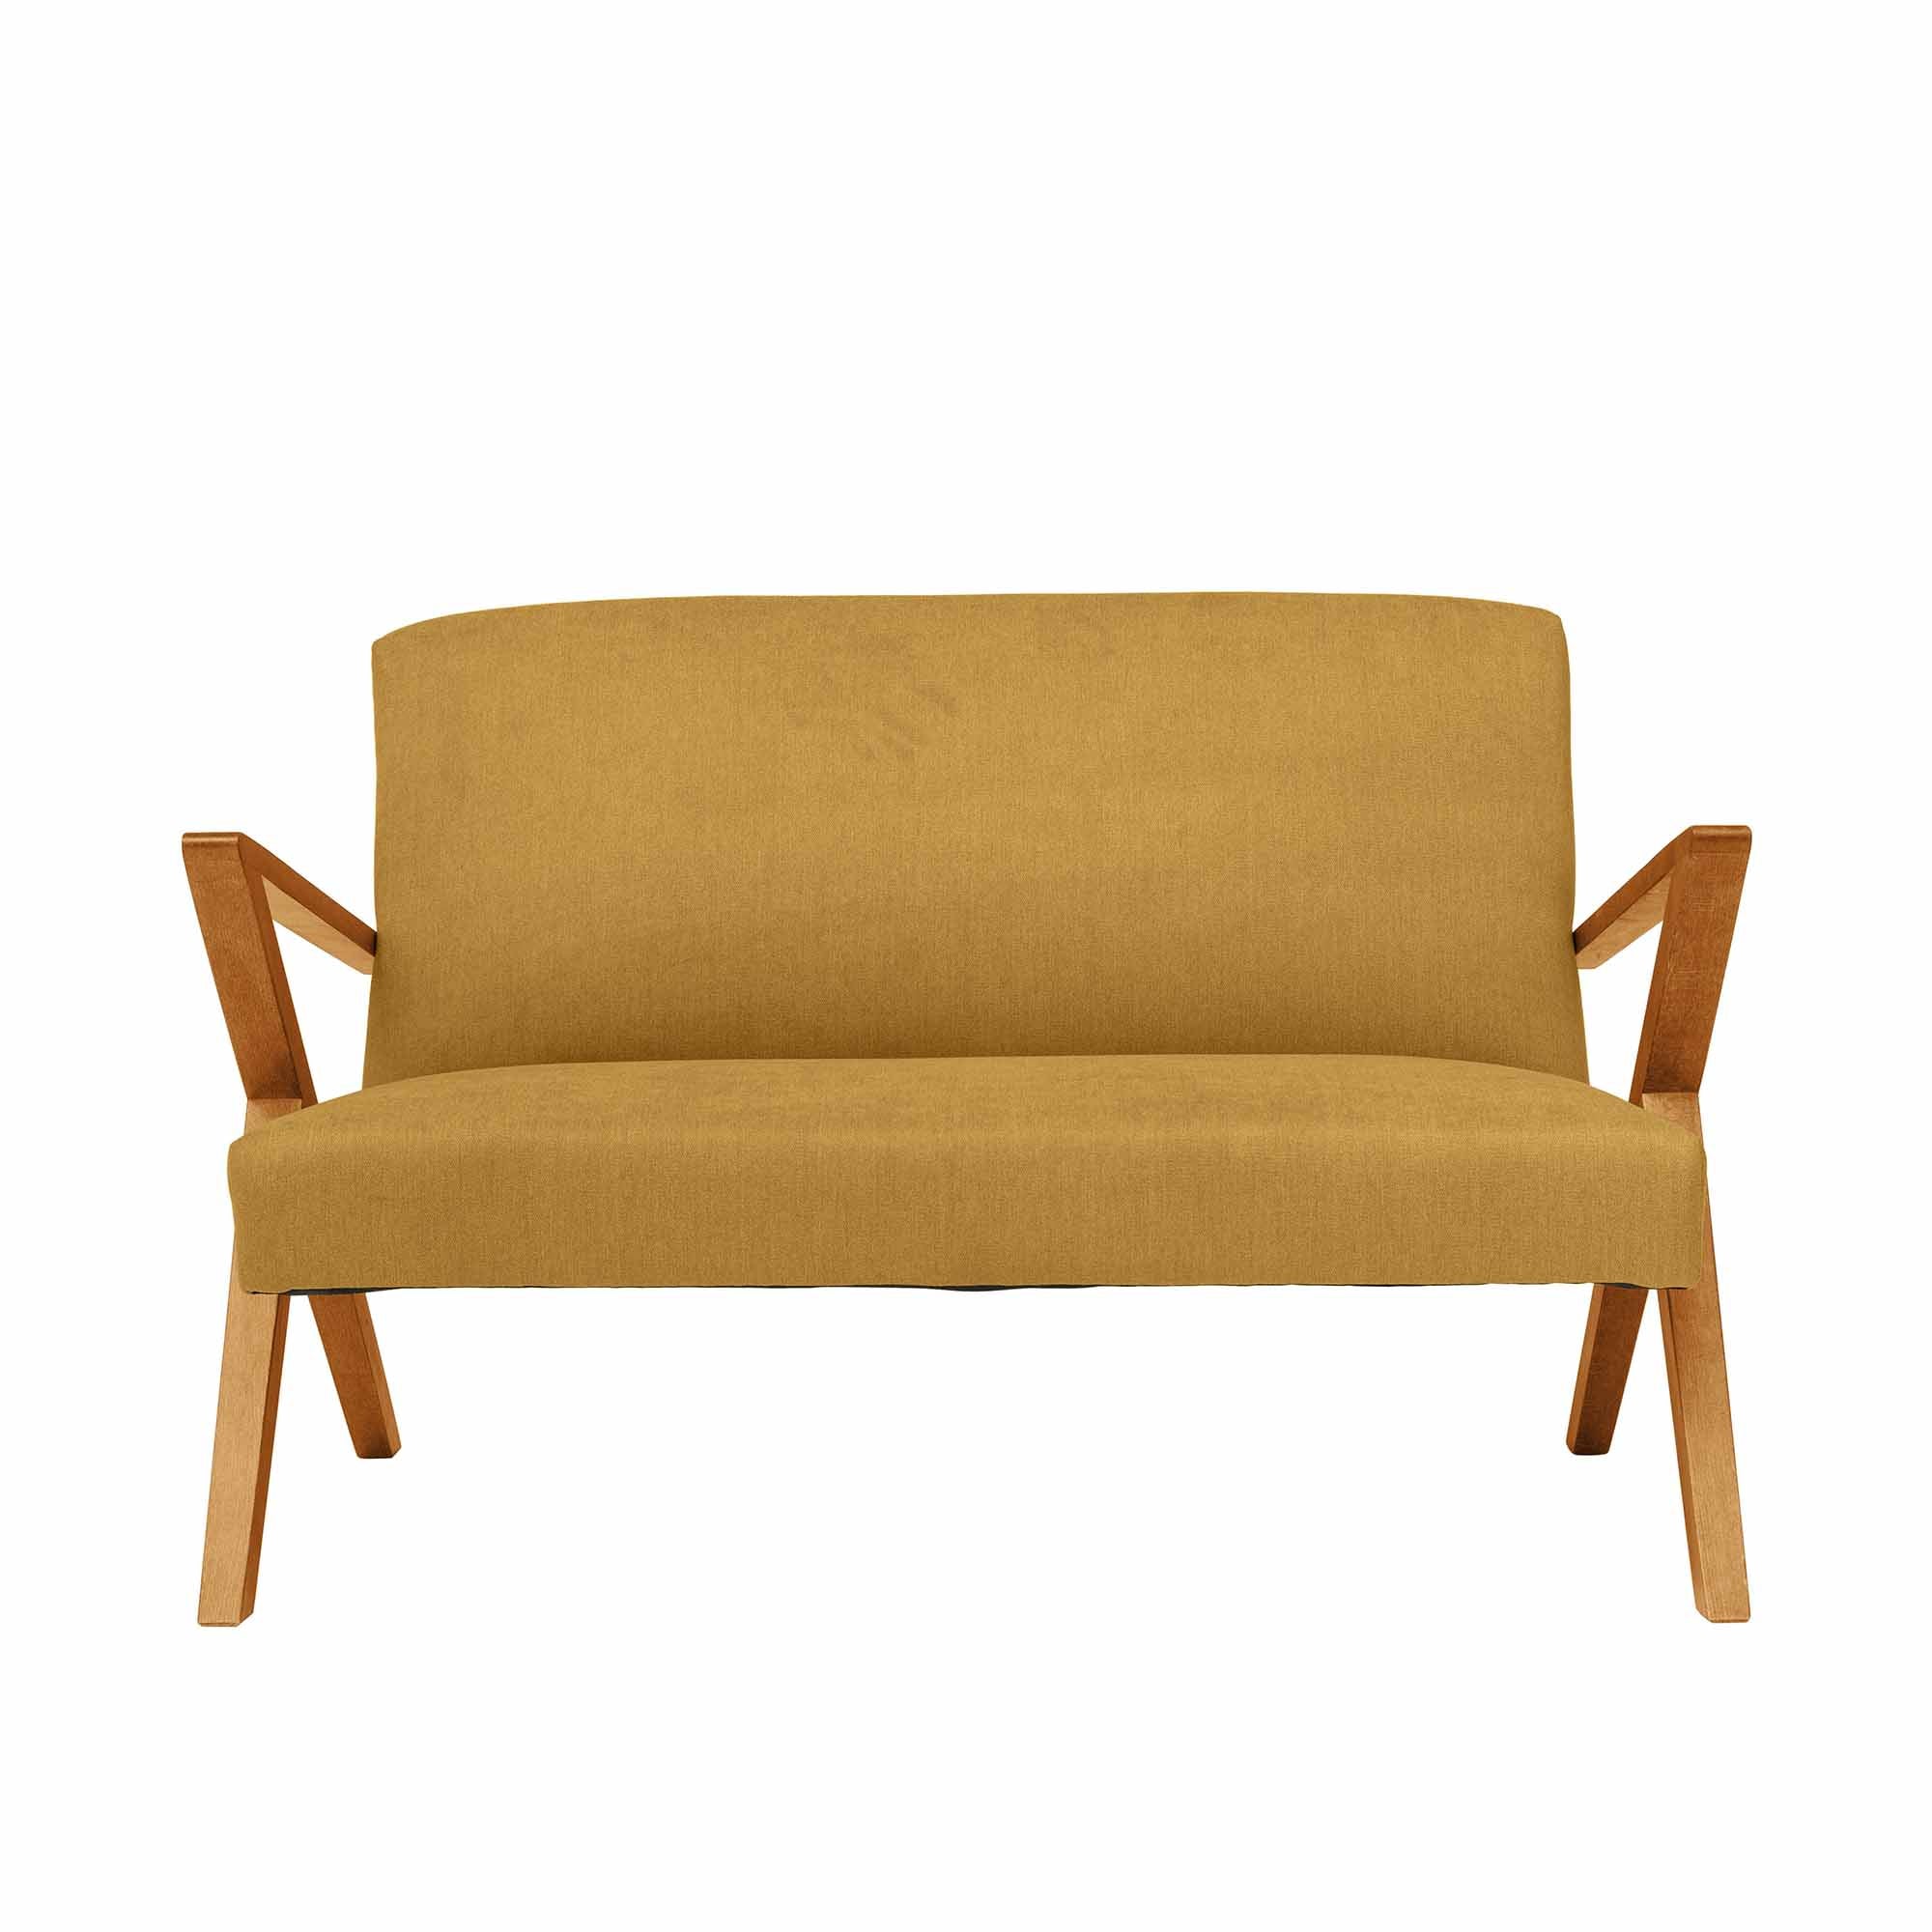 2-Seater Sofa, Beech Wood Frame, Oak Colour yellow fabric, front view